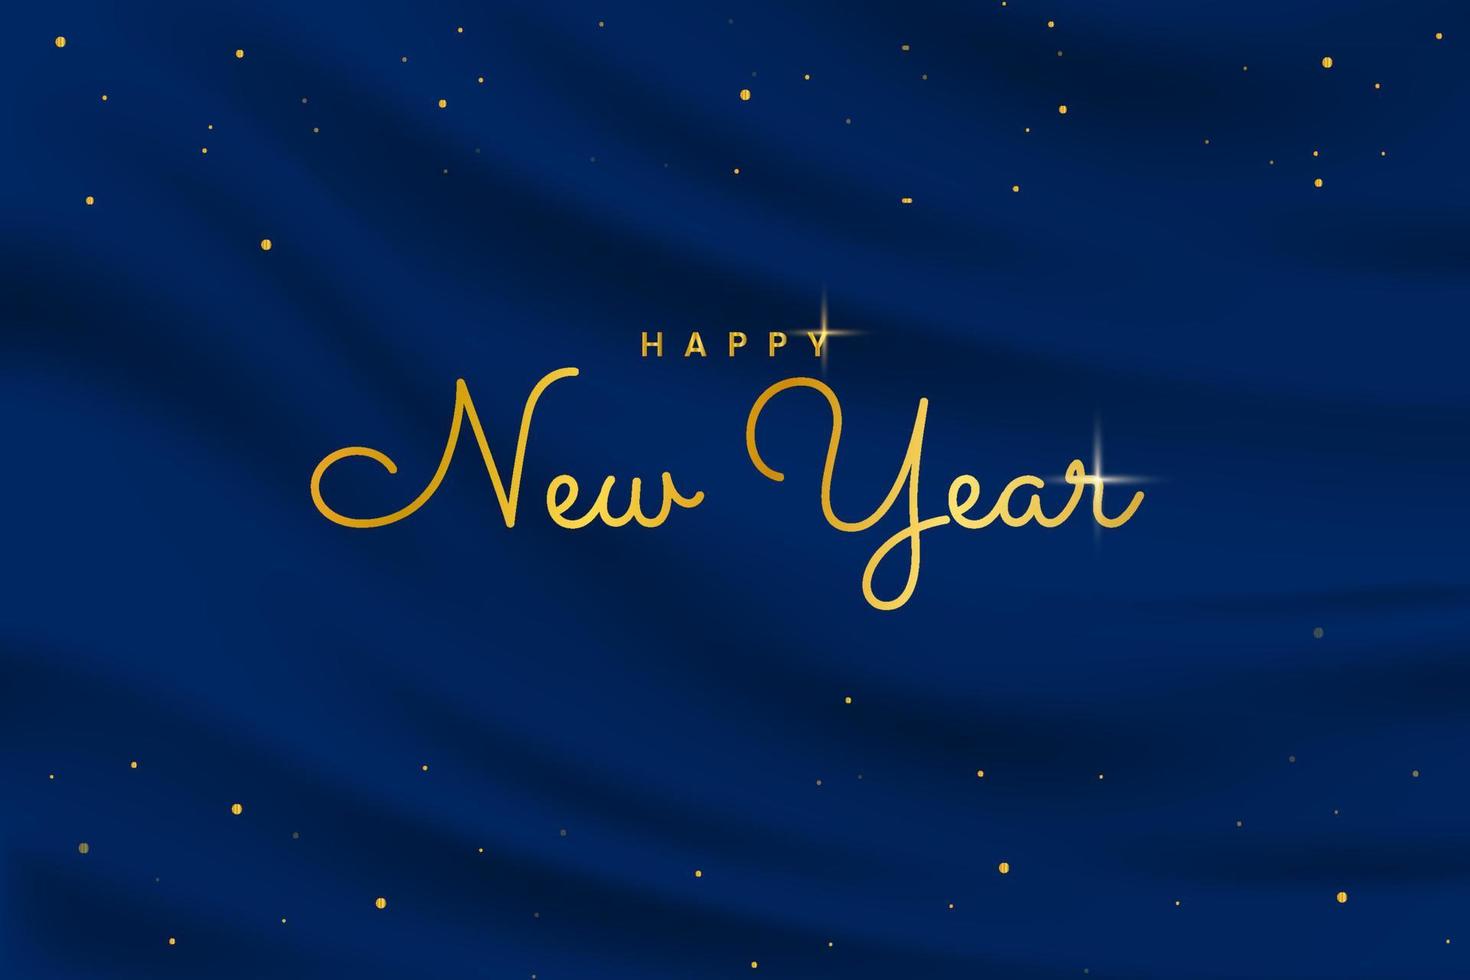 Happy new year background banner with gold text and glitters in navy colour vector